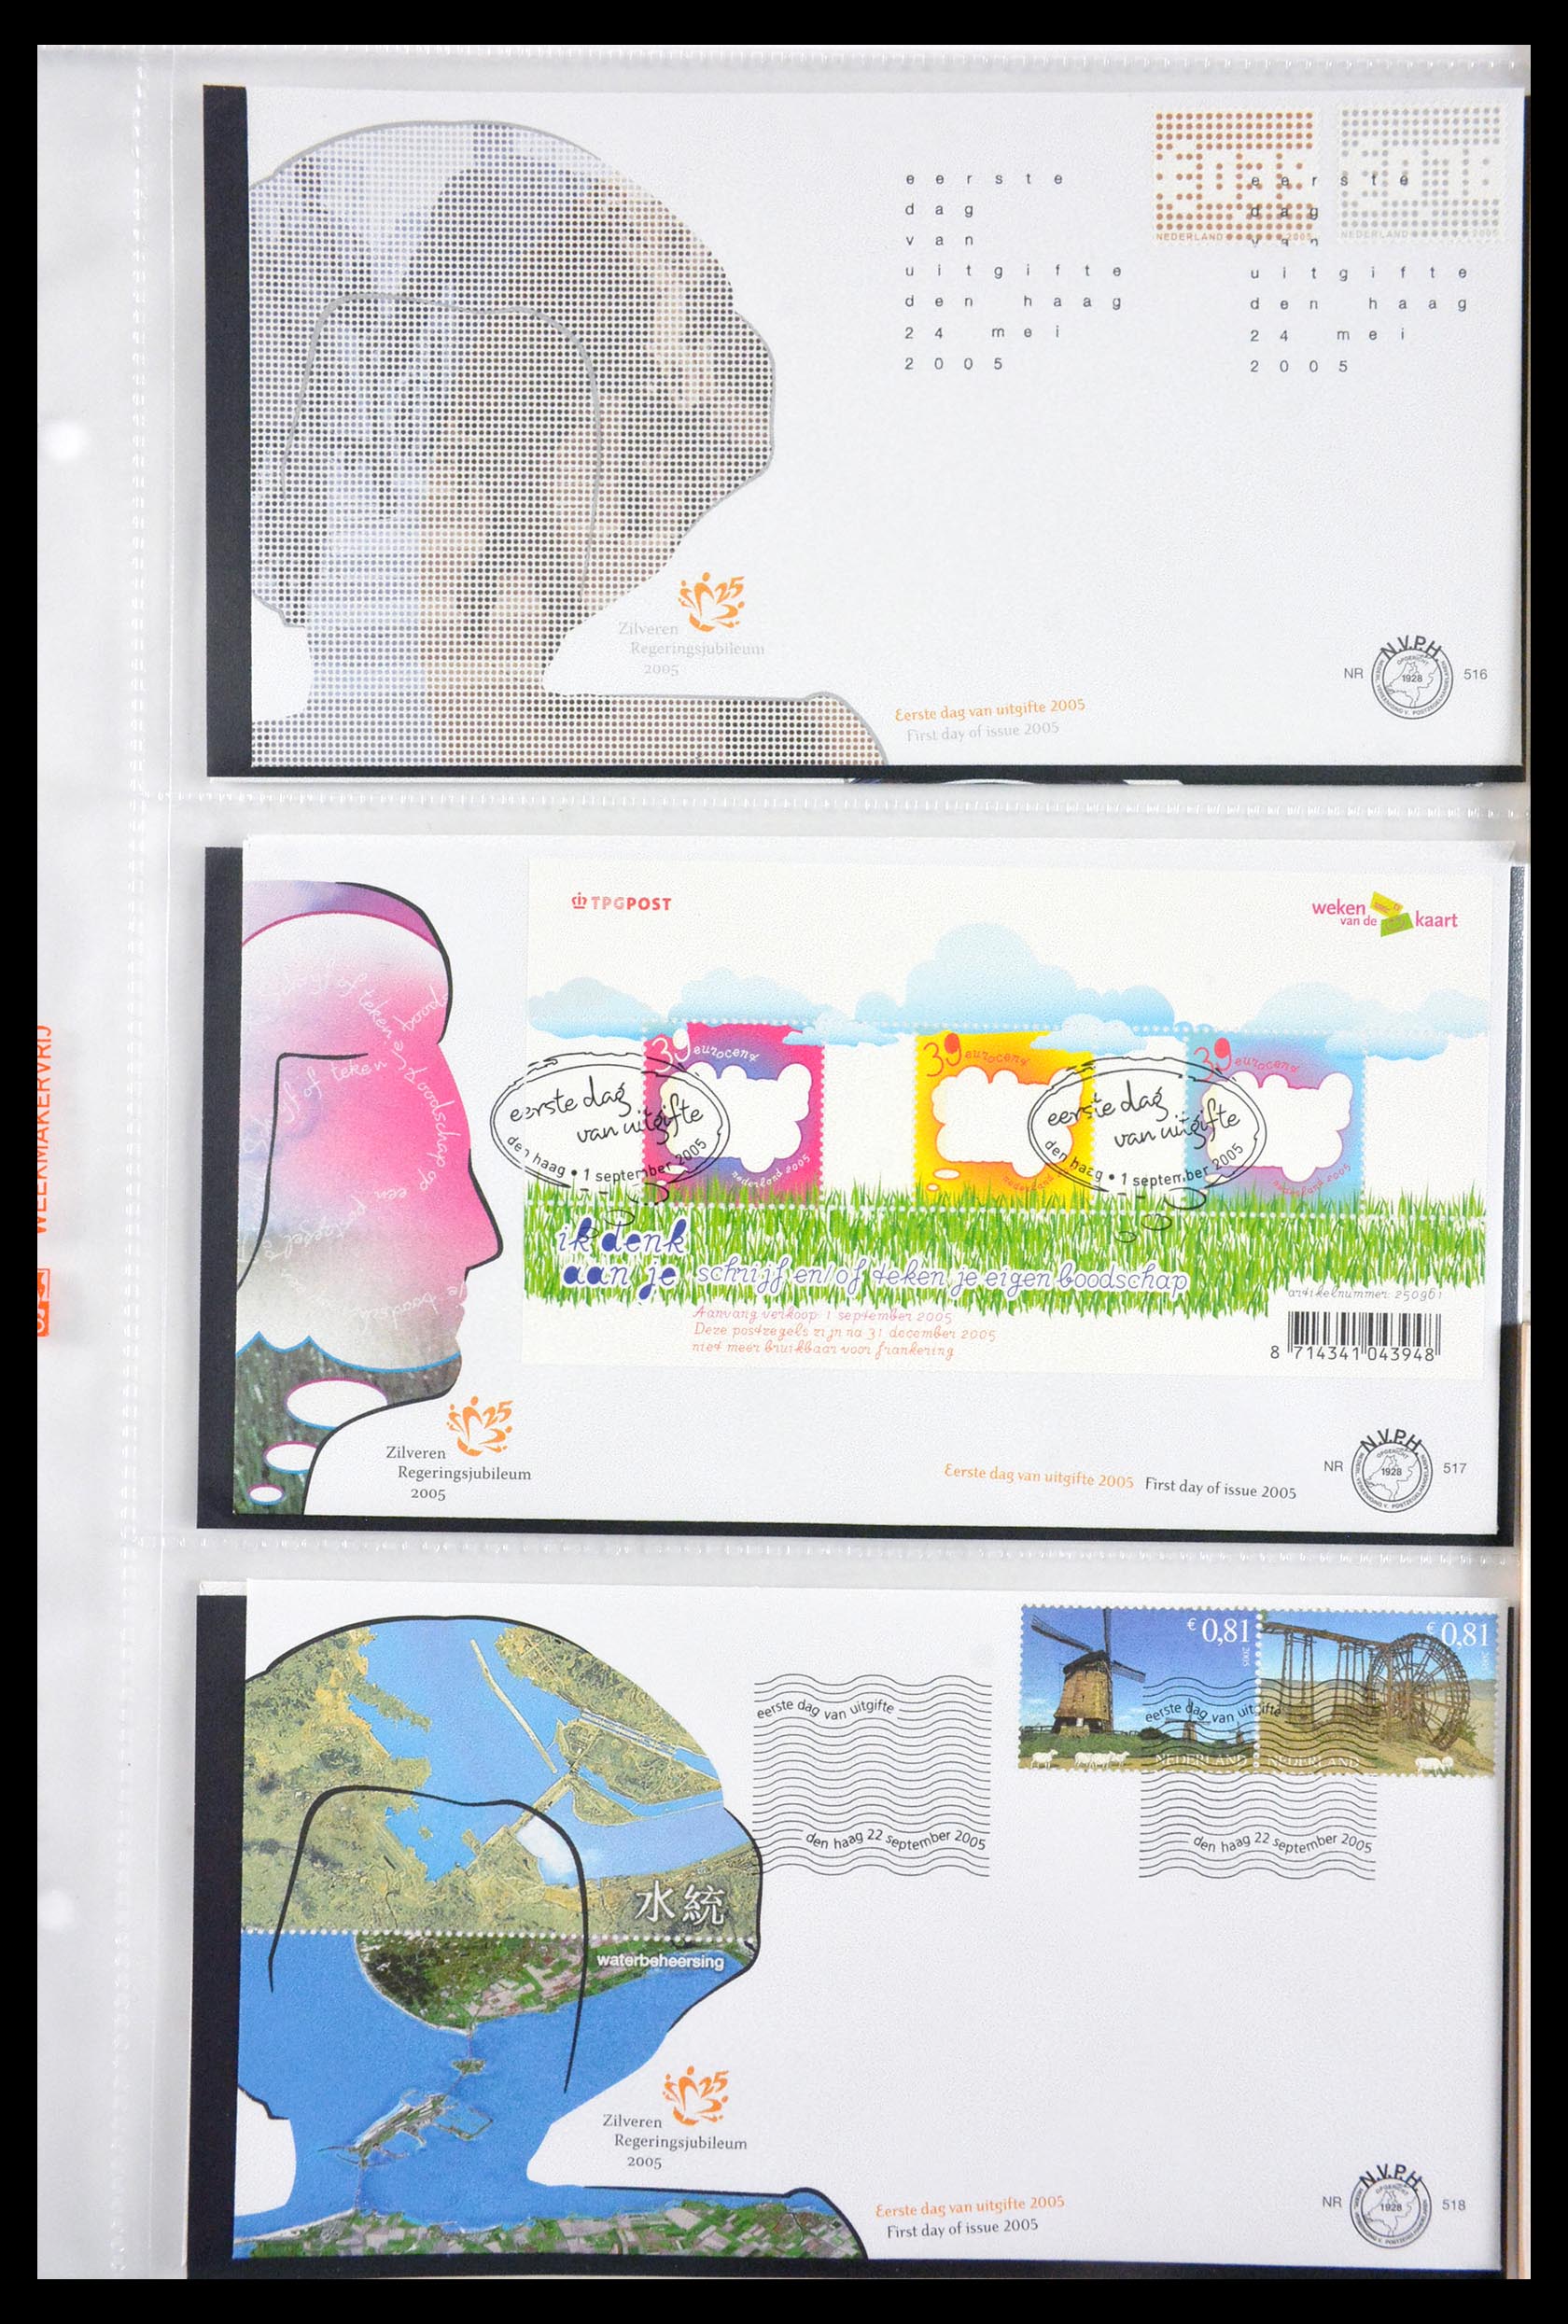 29666 069 - 29666 Netherlands 1997-2011 FDC's.